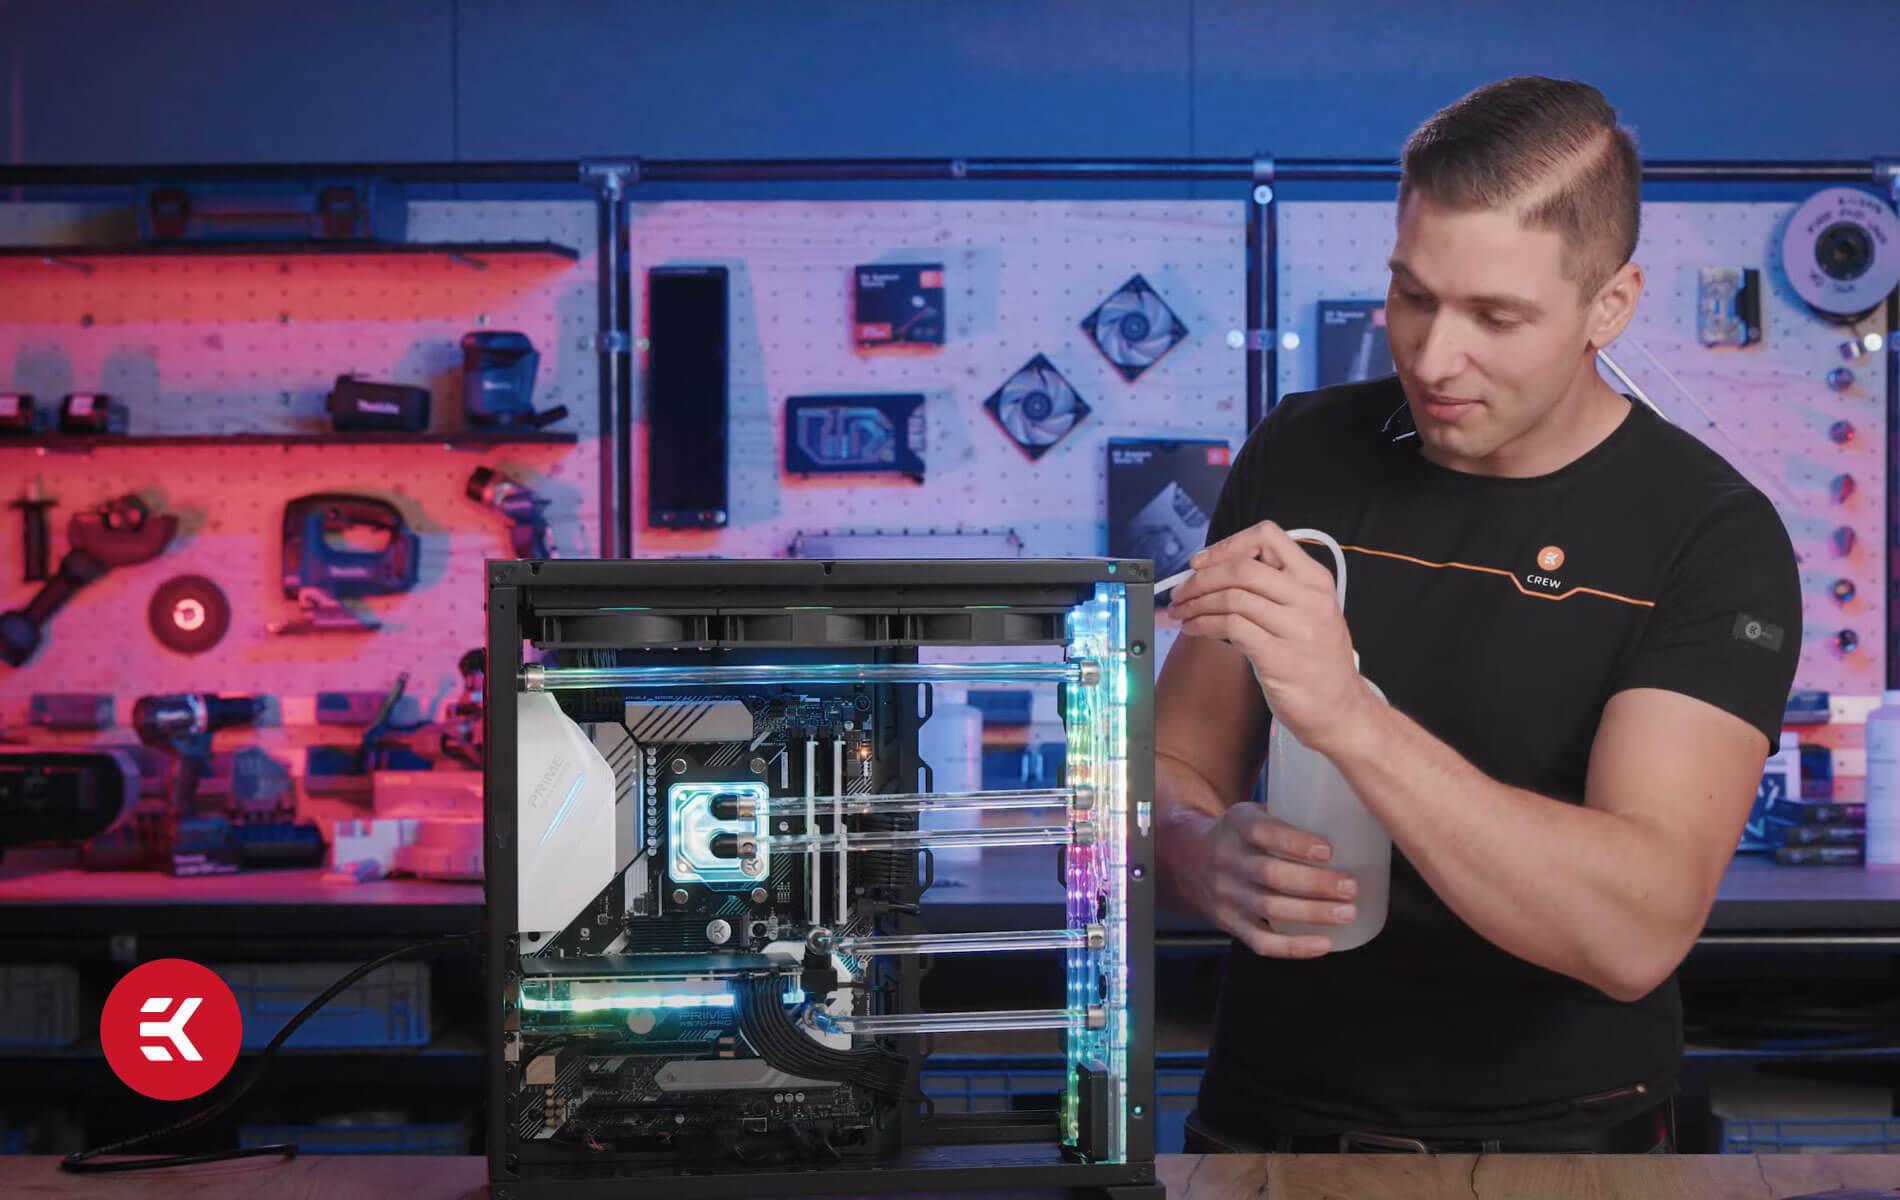 Does cooling your PC improve performance?